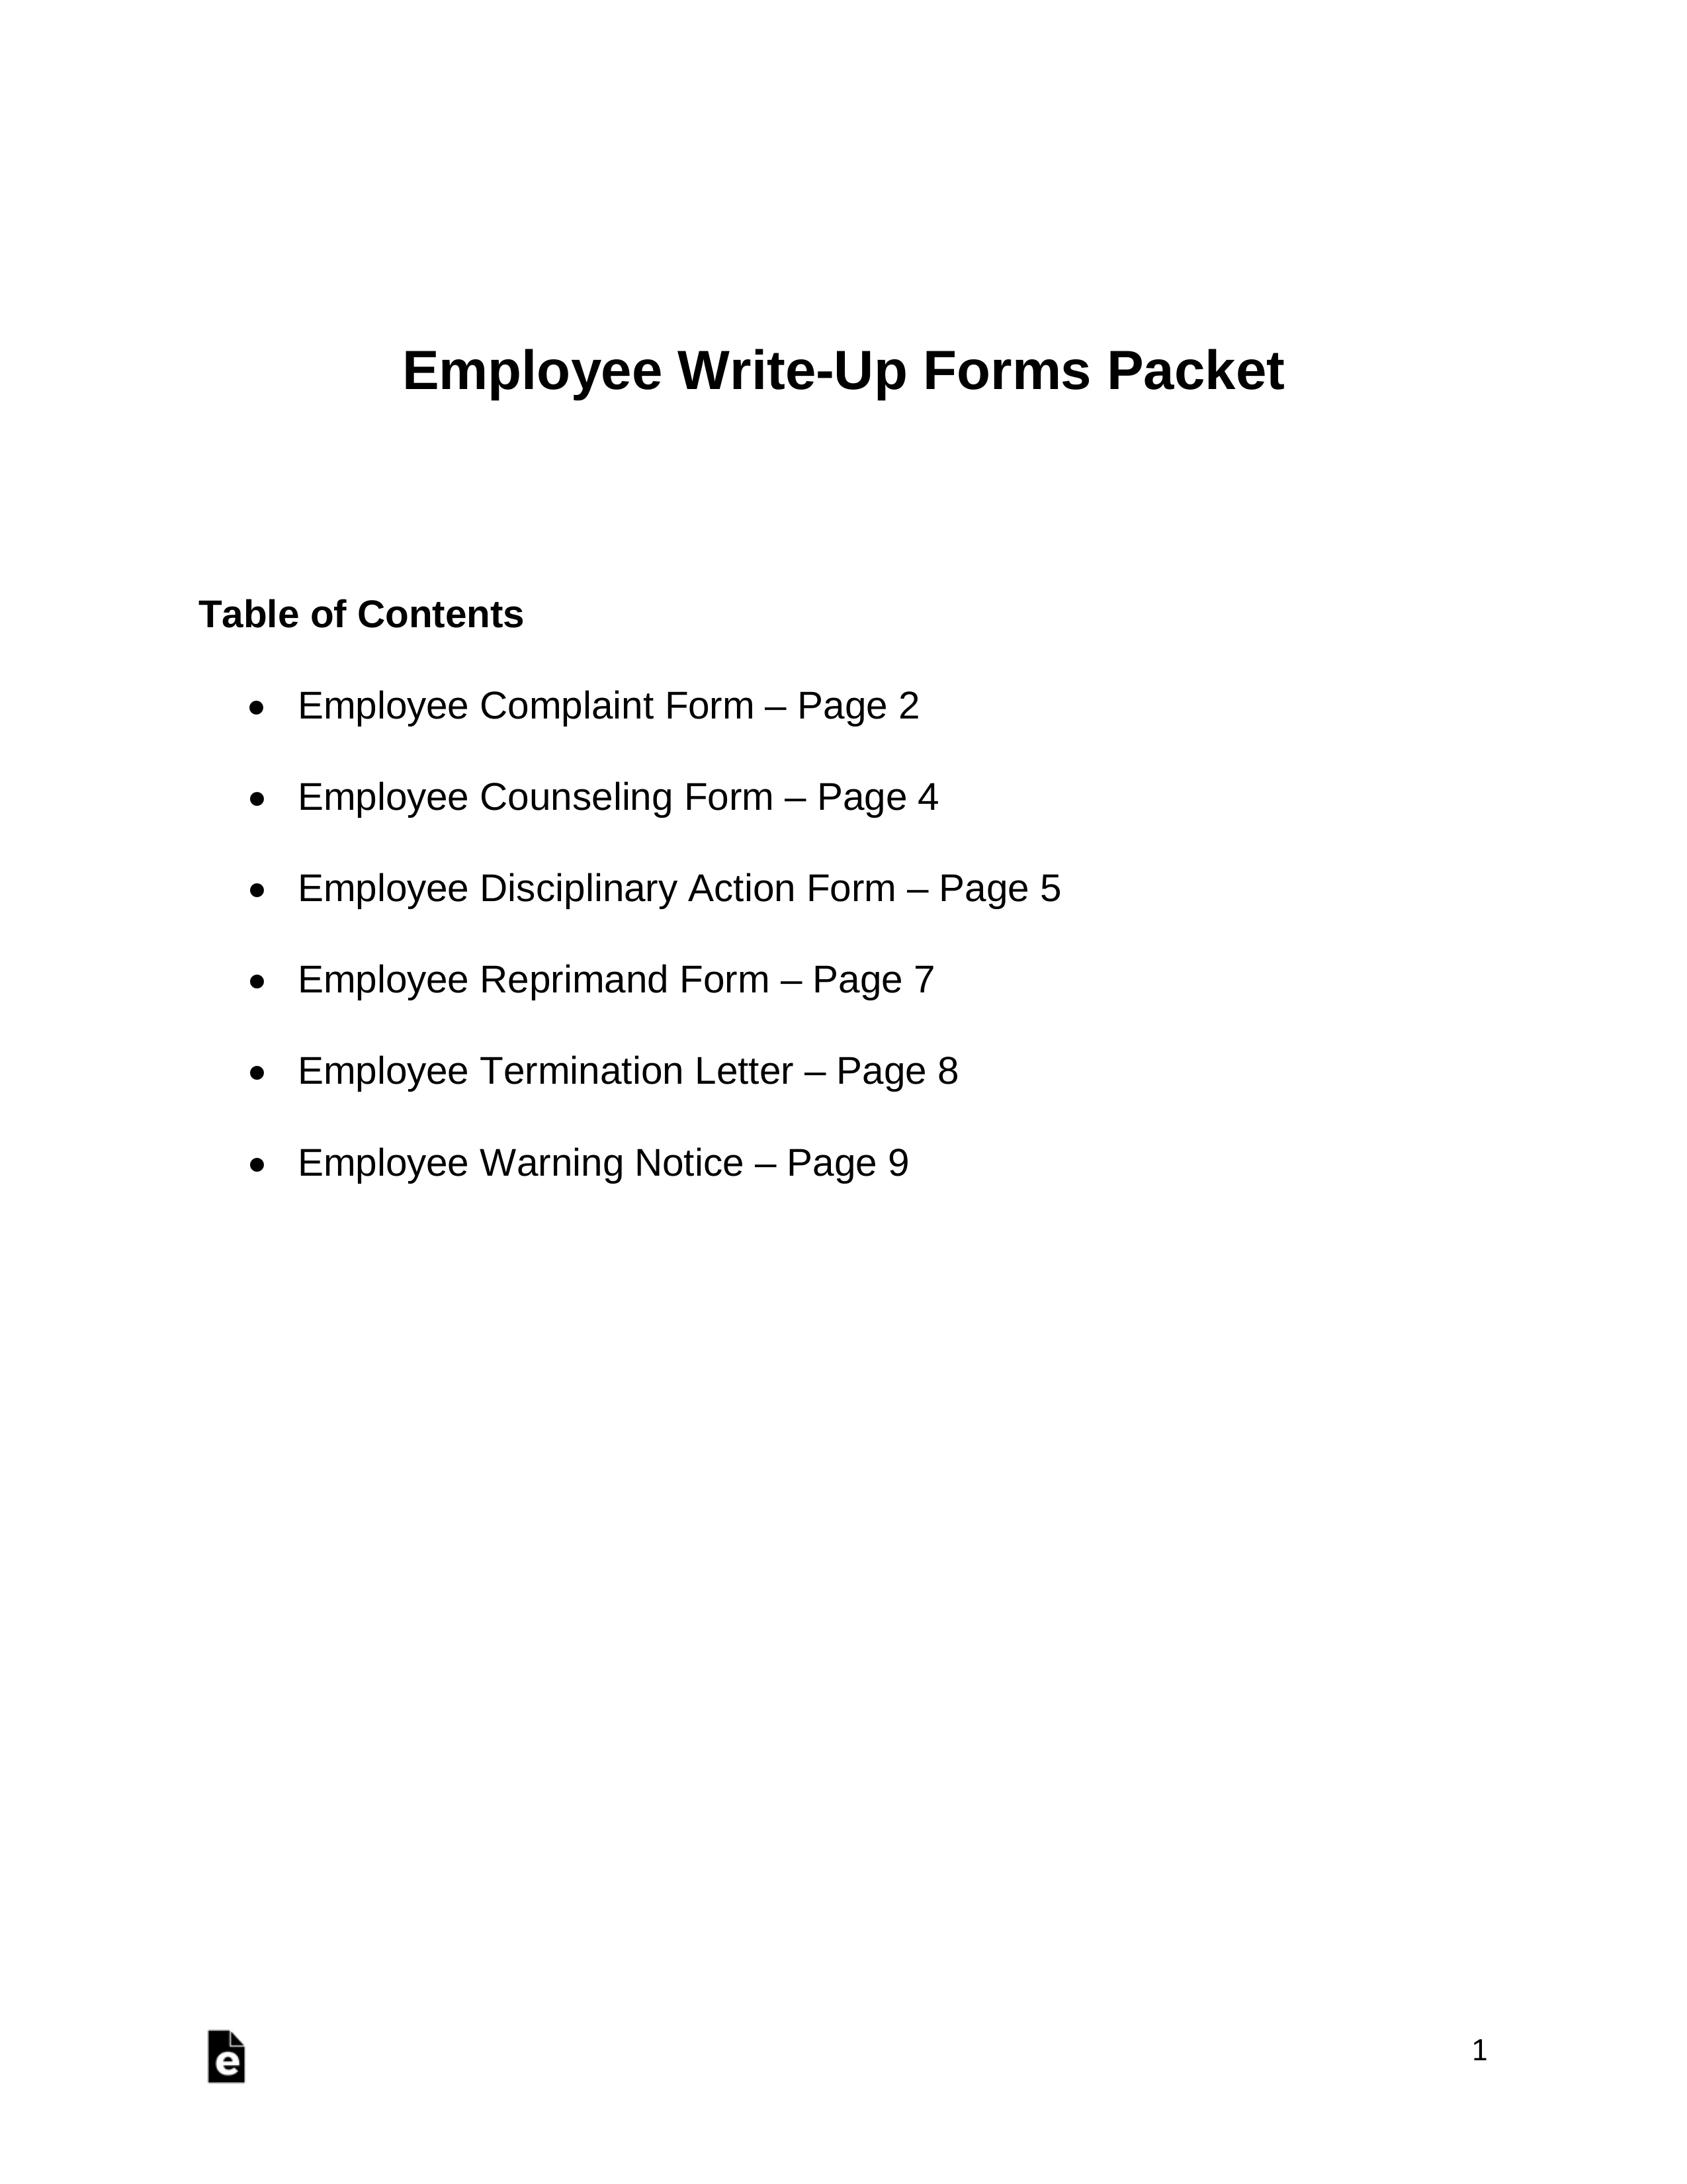 Employee Write-Up Forms